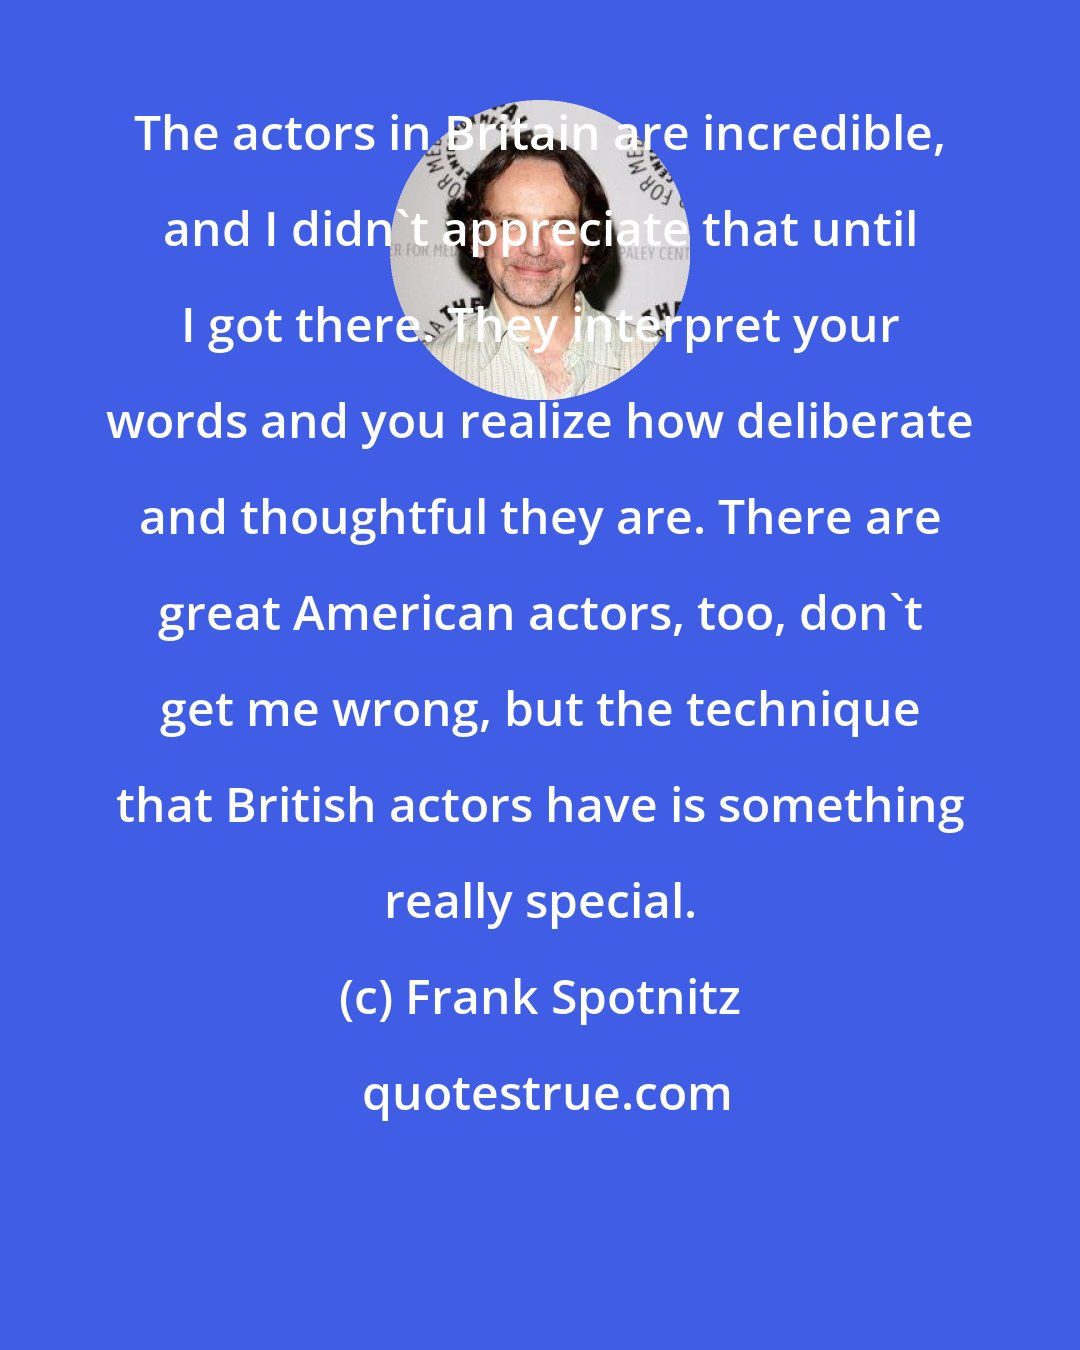 Frank Spotnitz: The actors in Britain are incredible, and I didn't appreciate that until I got there. They interpret your words and you realize how deliberate and thoughtful they are. There are great American actors, too, don't get me wrong, but the technique that British actors have is something really special.